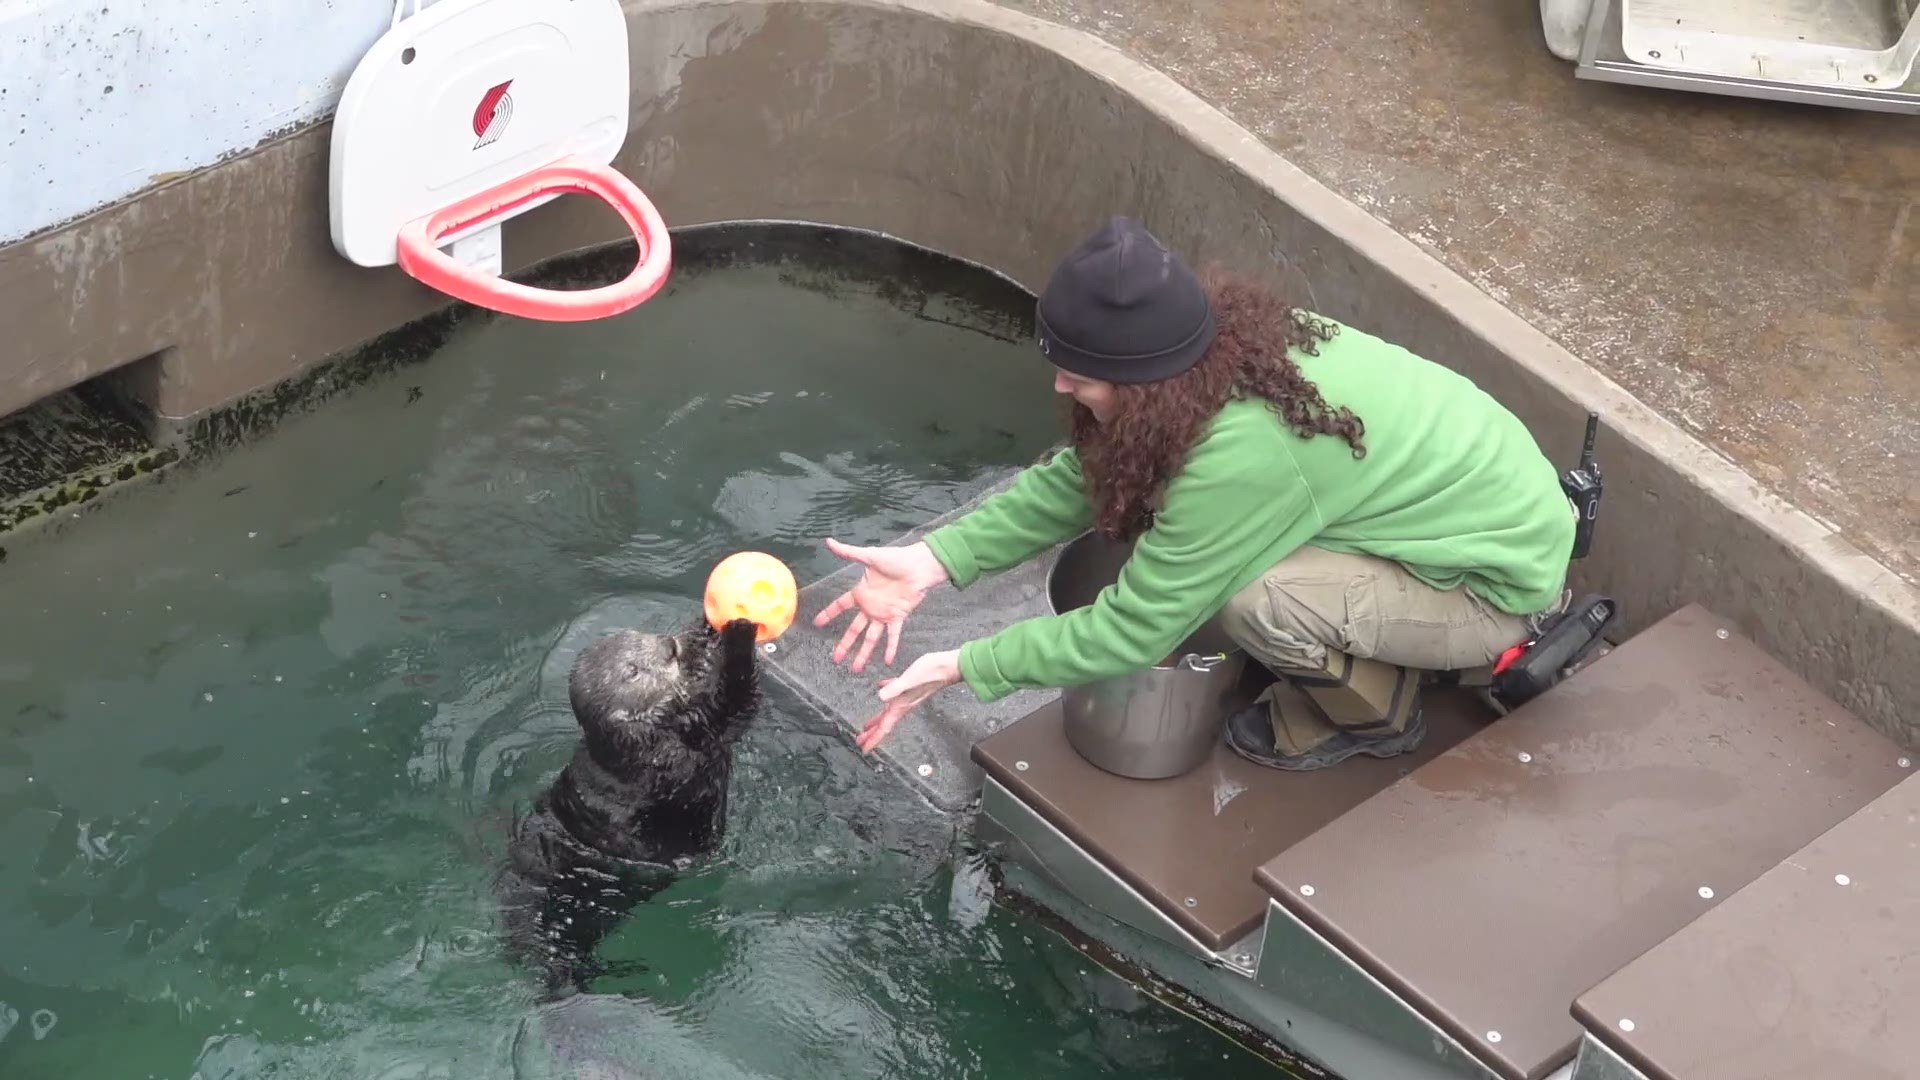 The Oregon Zoo has a new dunking all-star and her name is Juno!